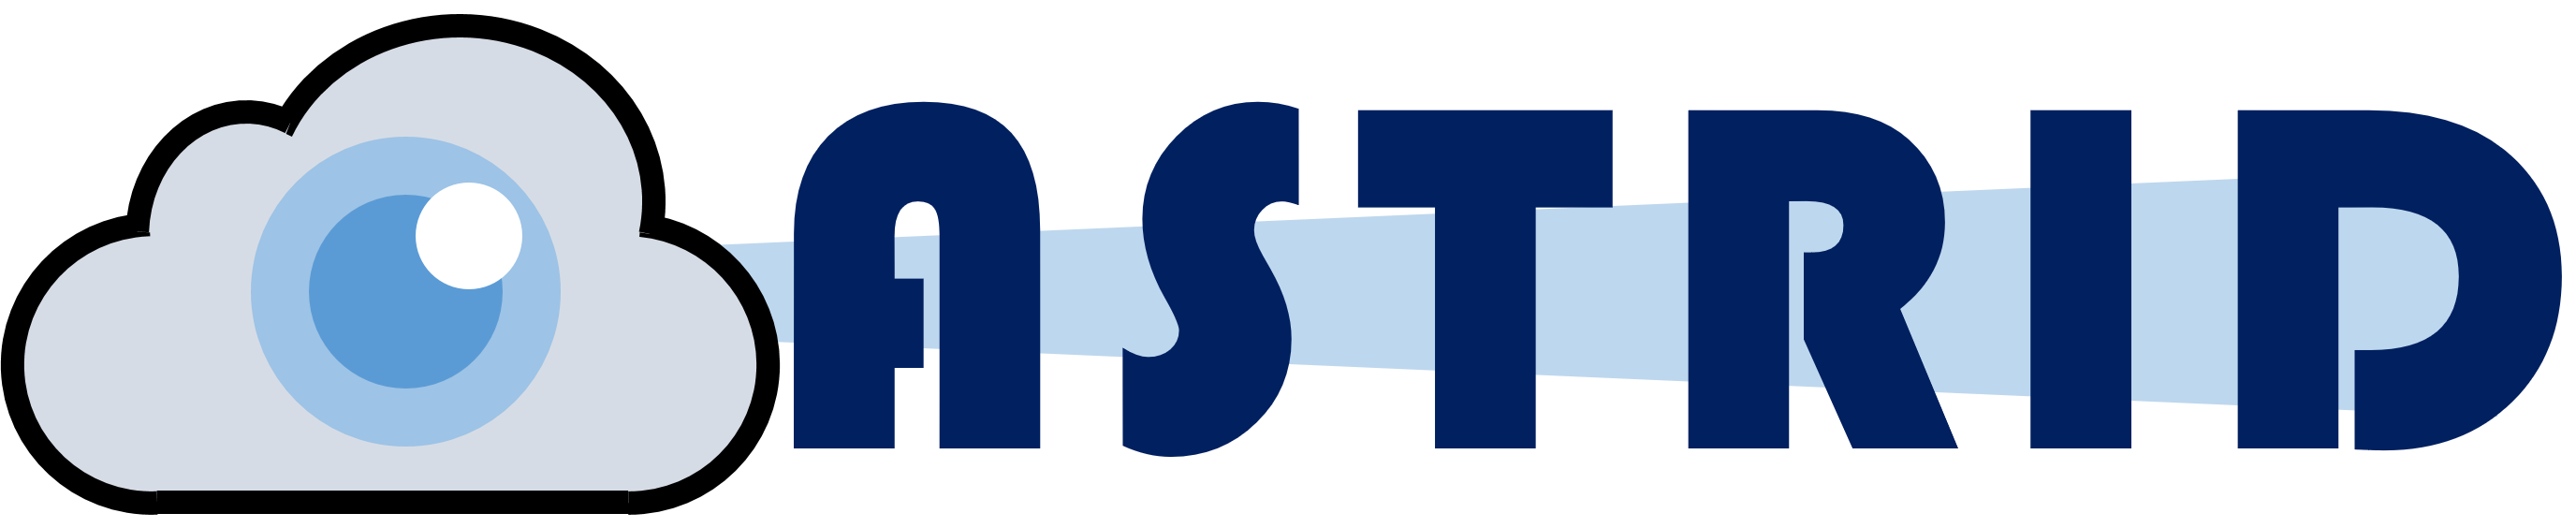 ASTRID Project Logo